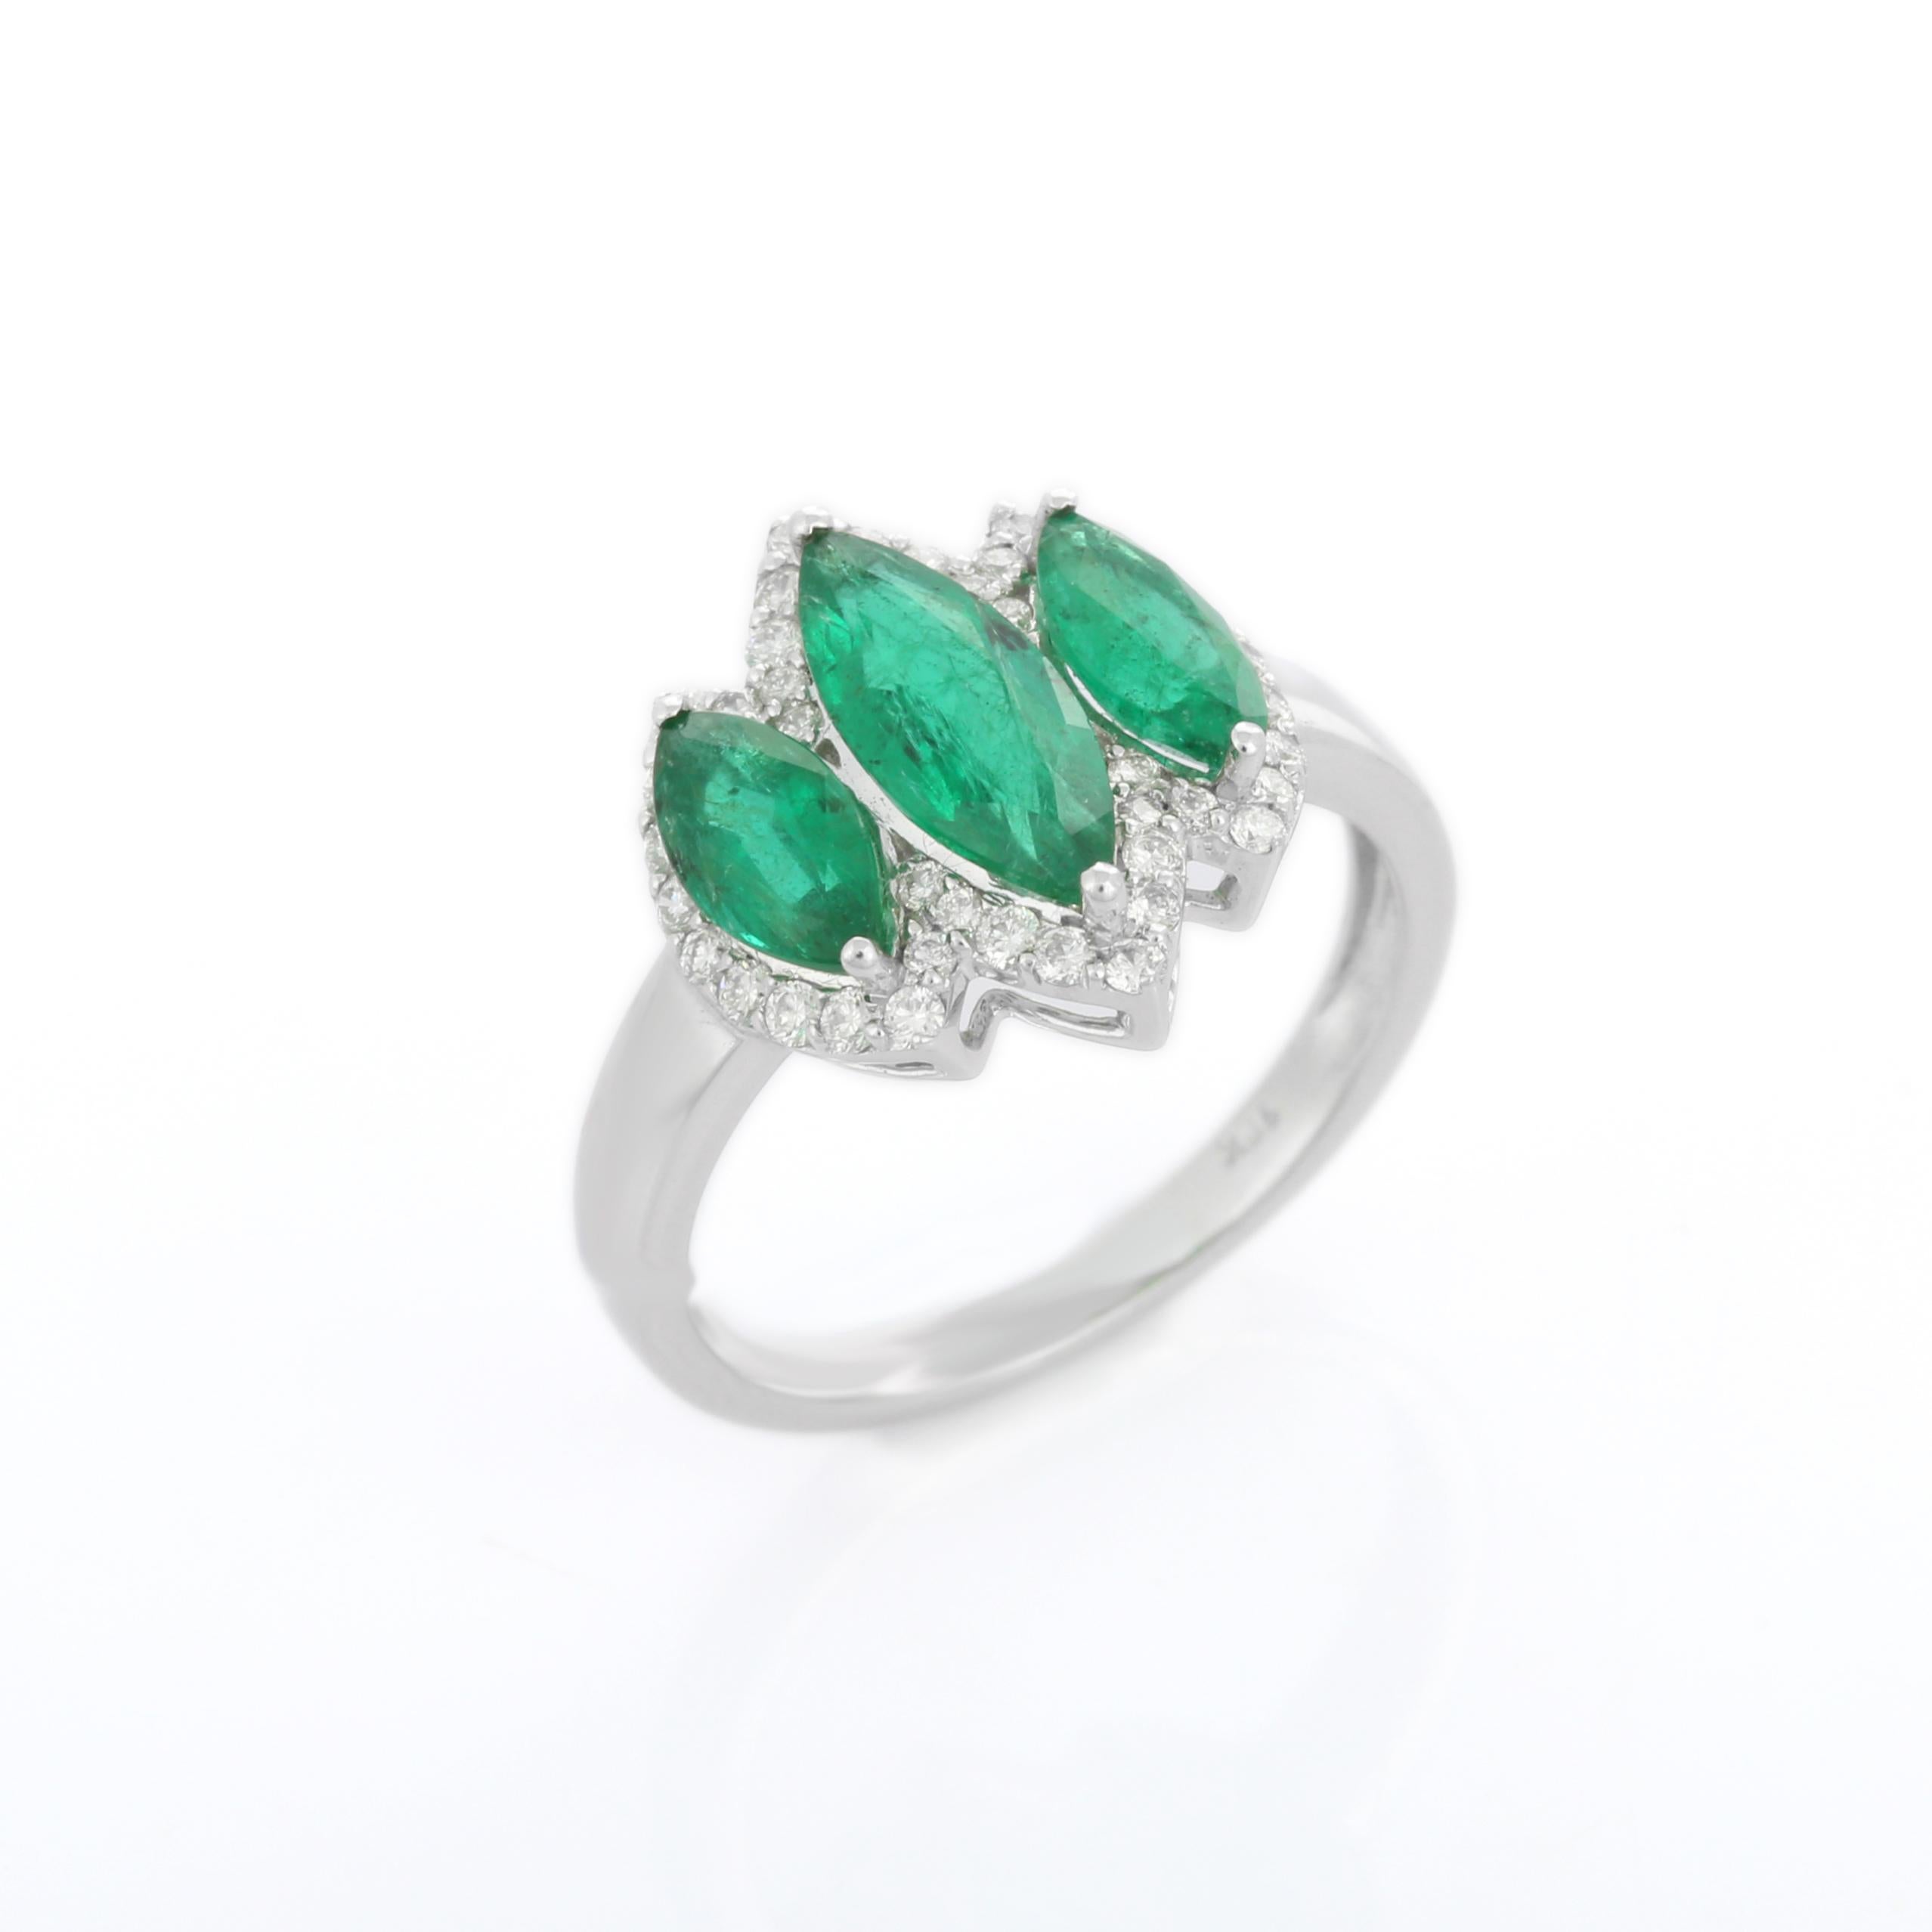 For Sale:  1.88 Carat Emerald Three Stone Ring with Diamonds in 18K White Gold 5